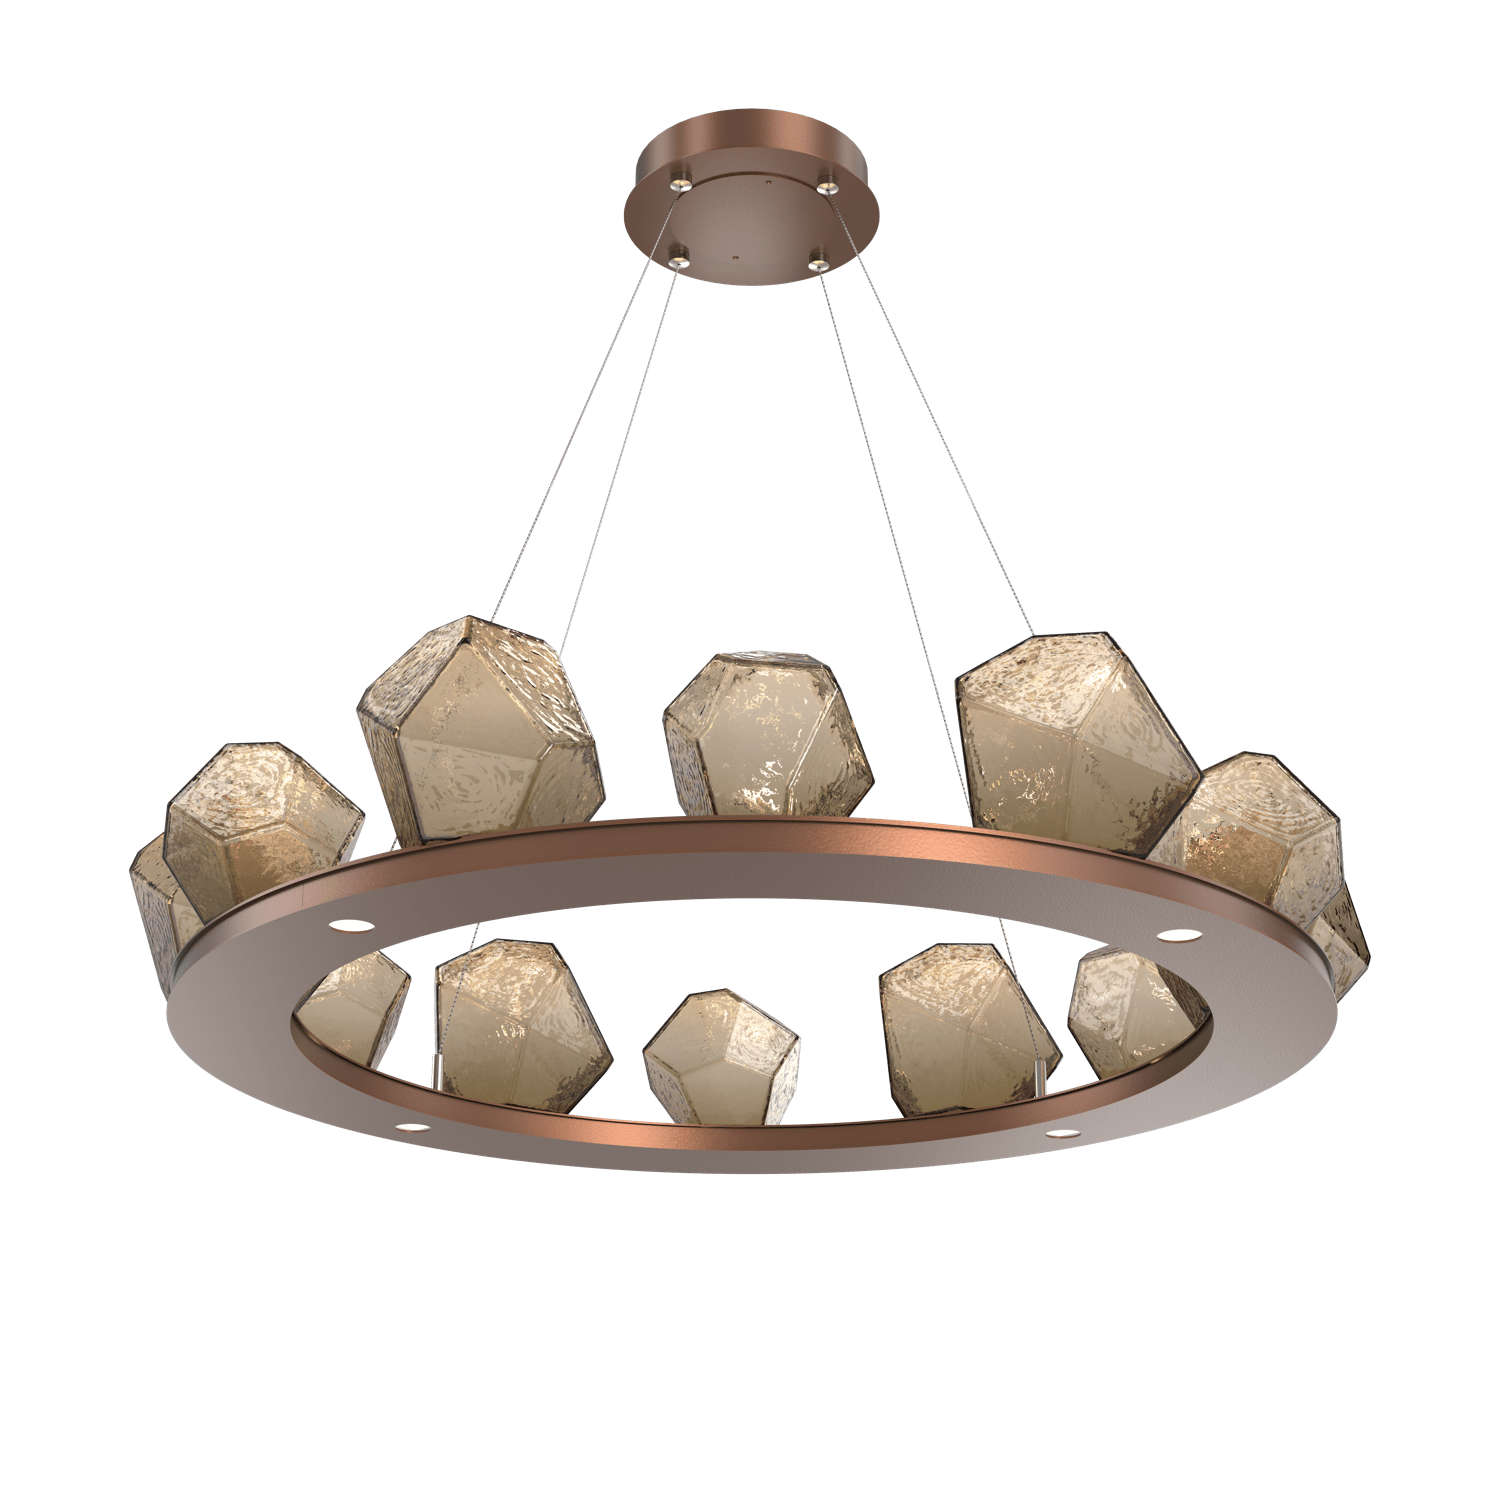 CHB0039-0C-BB-B-Hammerton-Studio-Gem-37-inch-ring-chandelier-with-burnished-bronze-finish-and-bronze-blown-glass-shades-and-LED-lamping